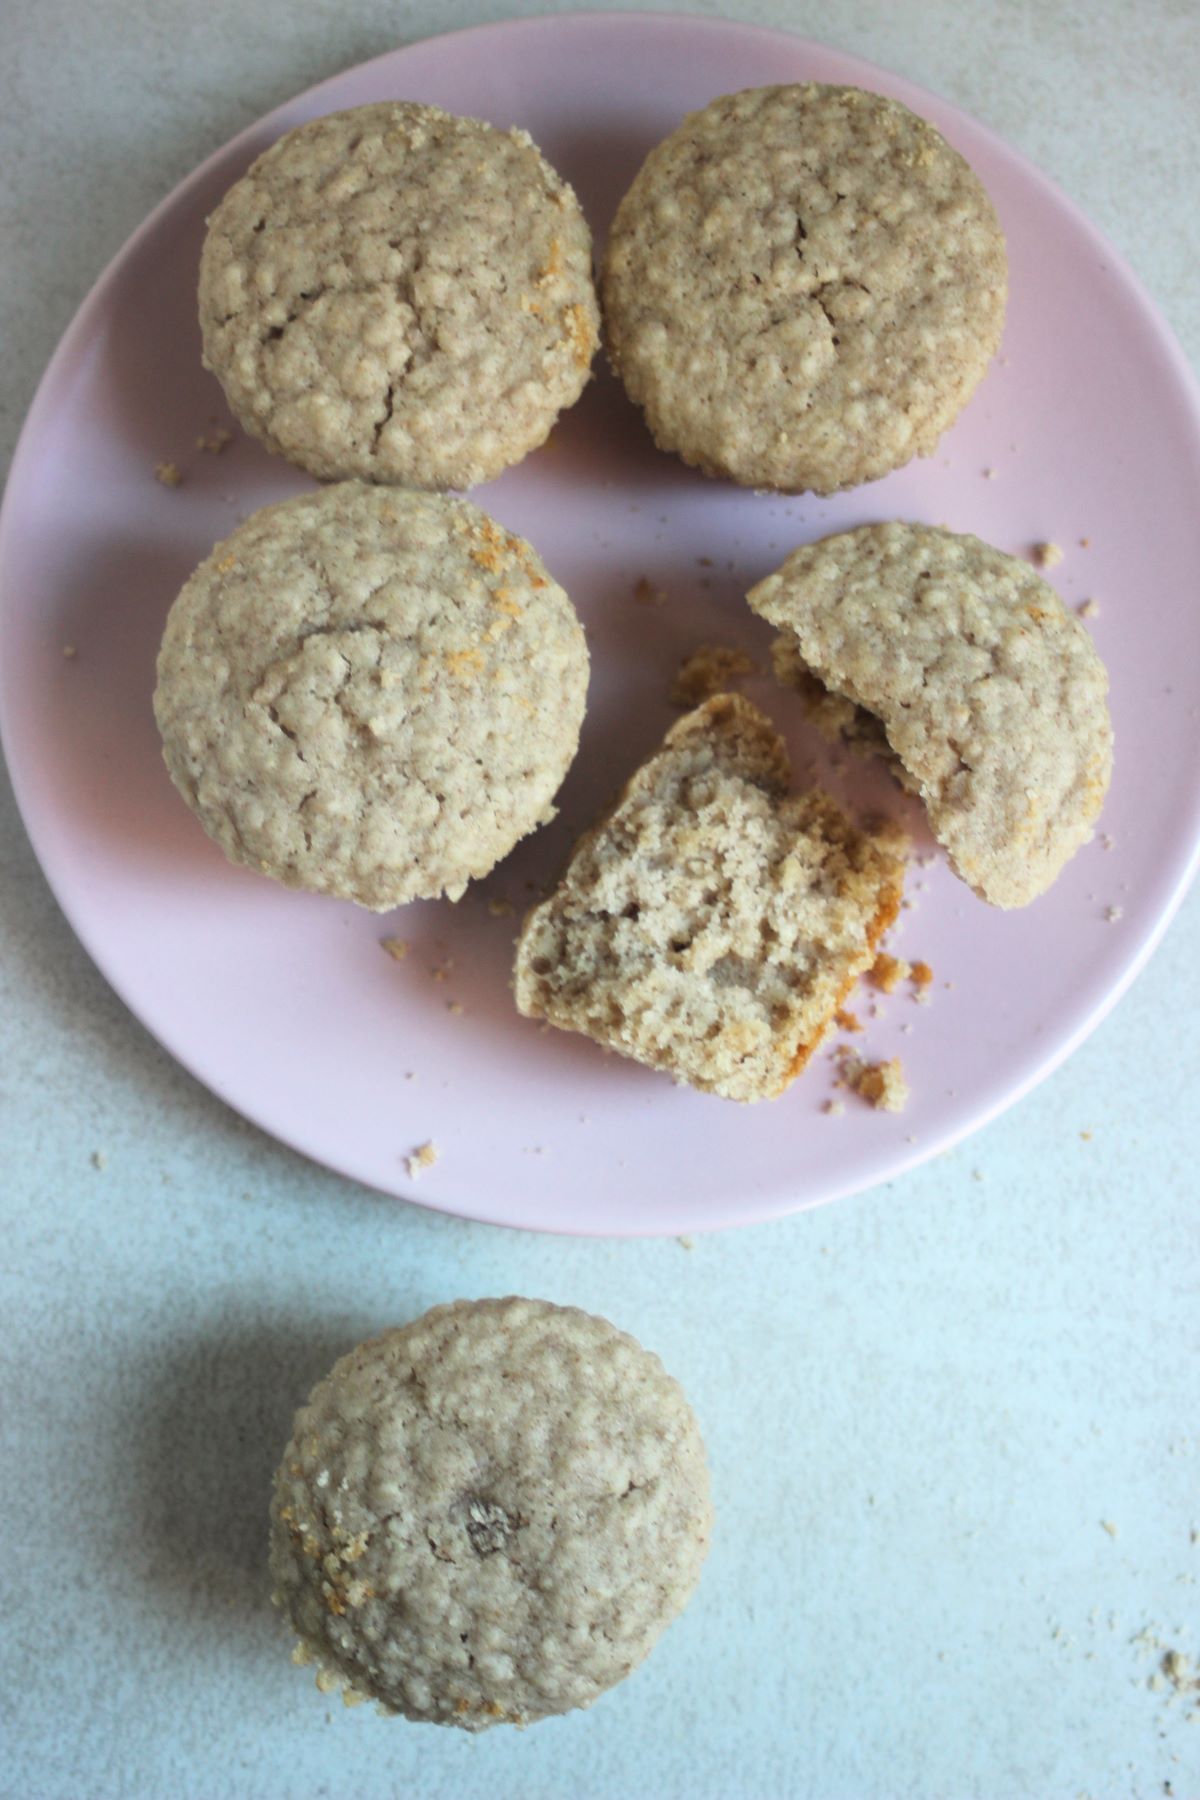 Oatmeal muffins on a pink plate seen from above. One muffin beside the plate.